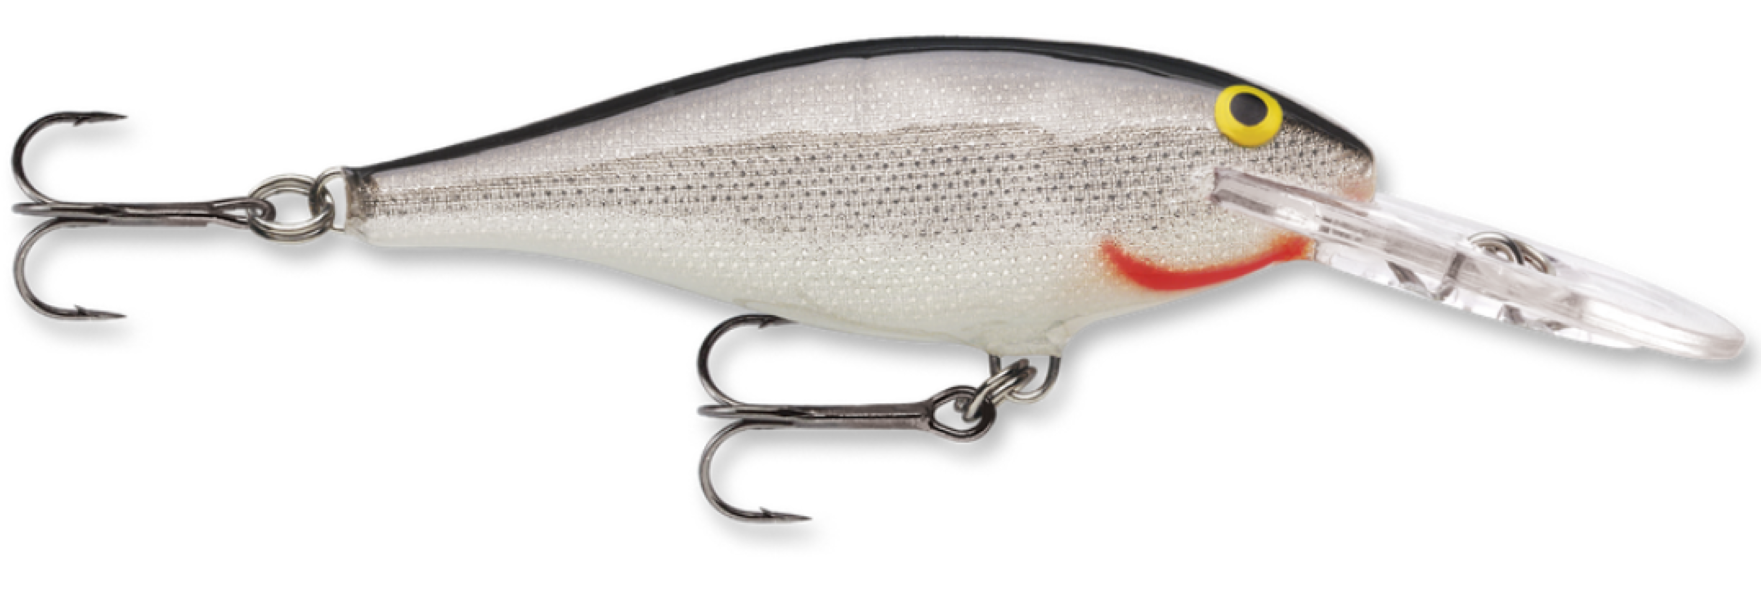 Rapala SP05FML Skitter Pop Fishing Lure, Live Field Mouse, 2, 3/16 oz